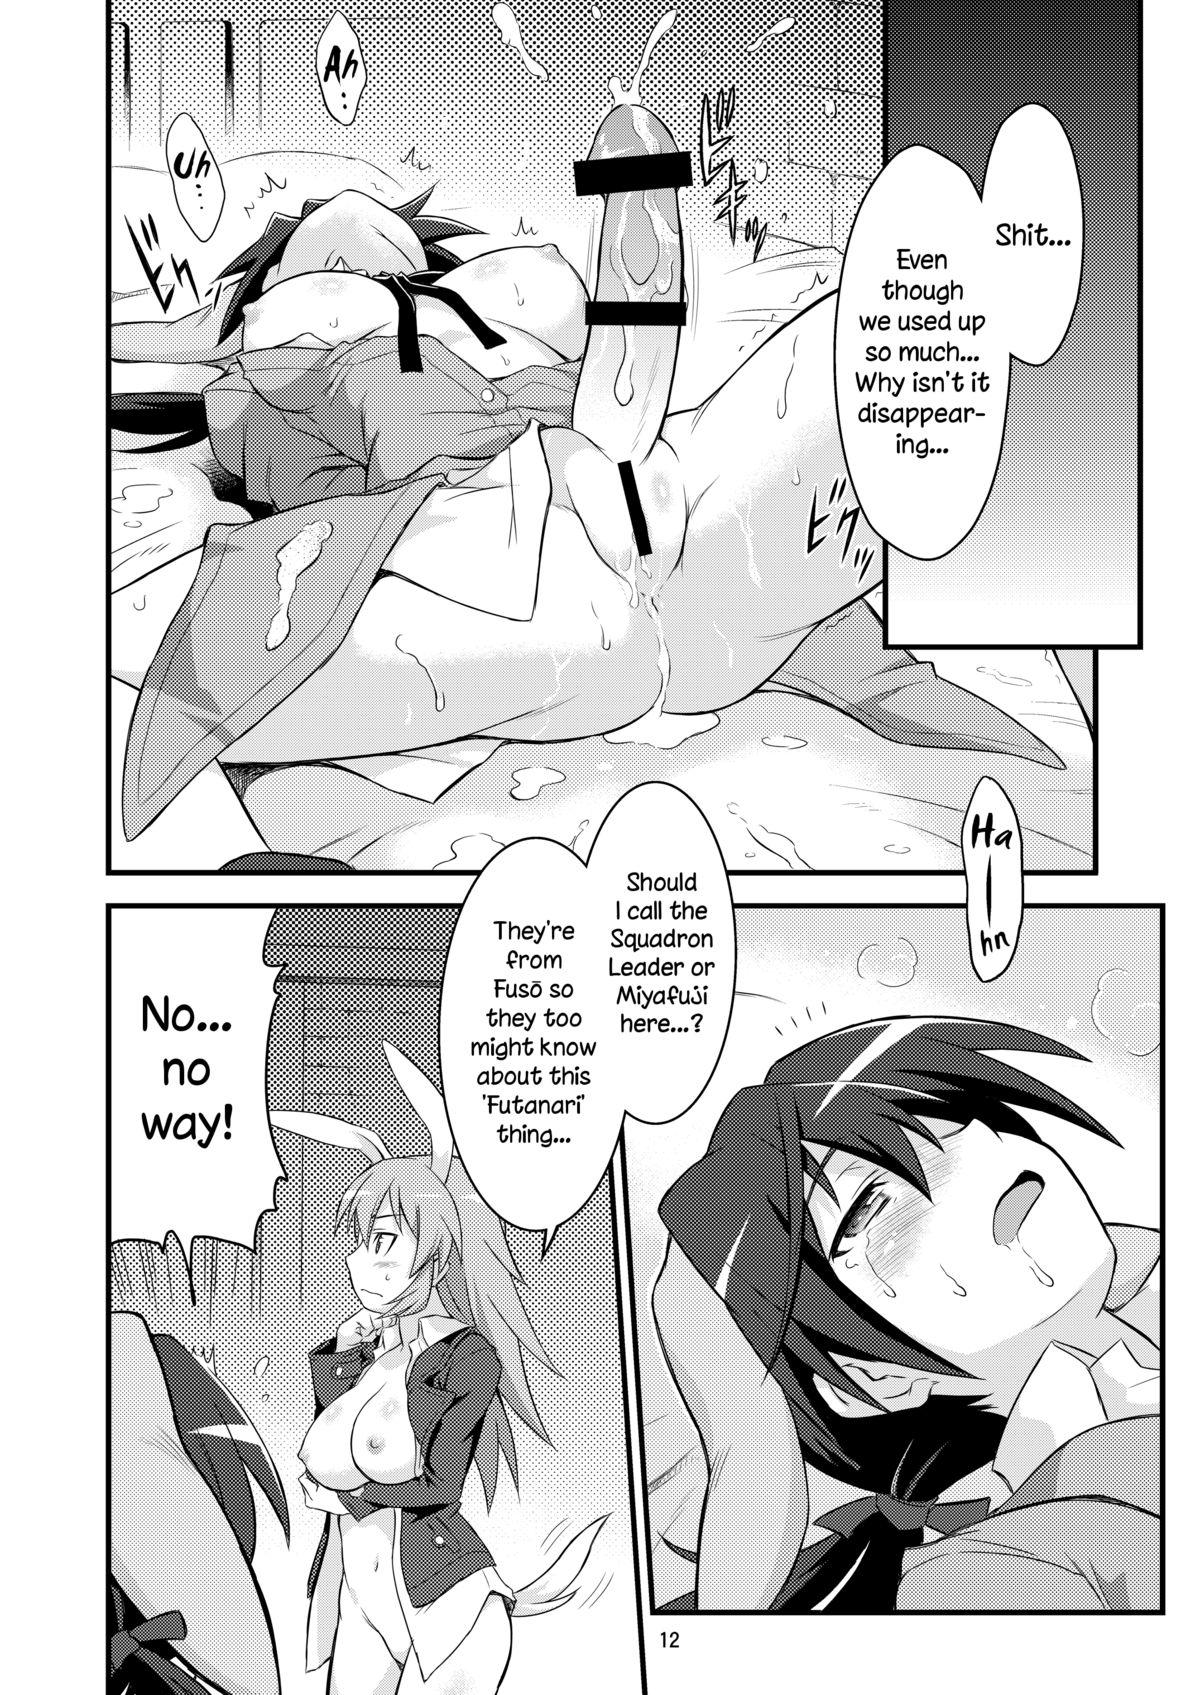 Nut Shir and Gert in Big Trouble - Strike witches Hardcoresex - Page 12